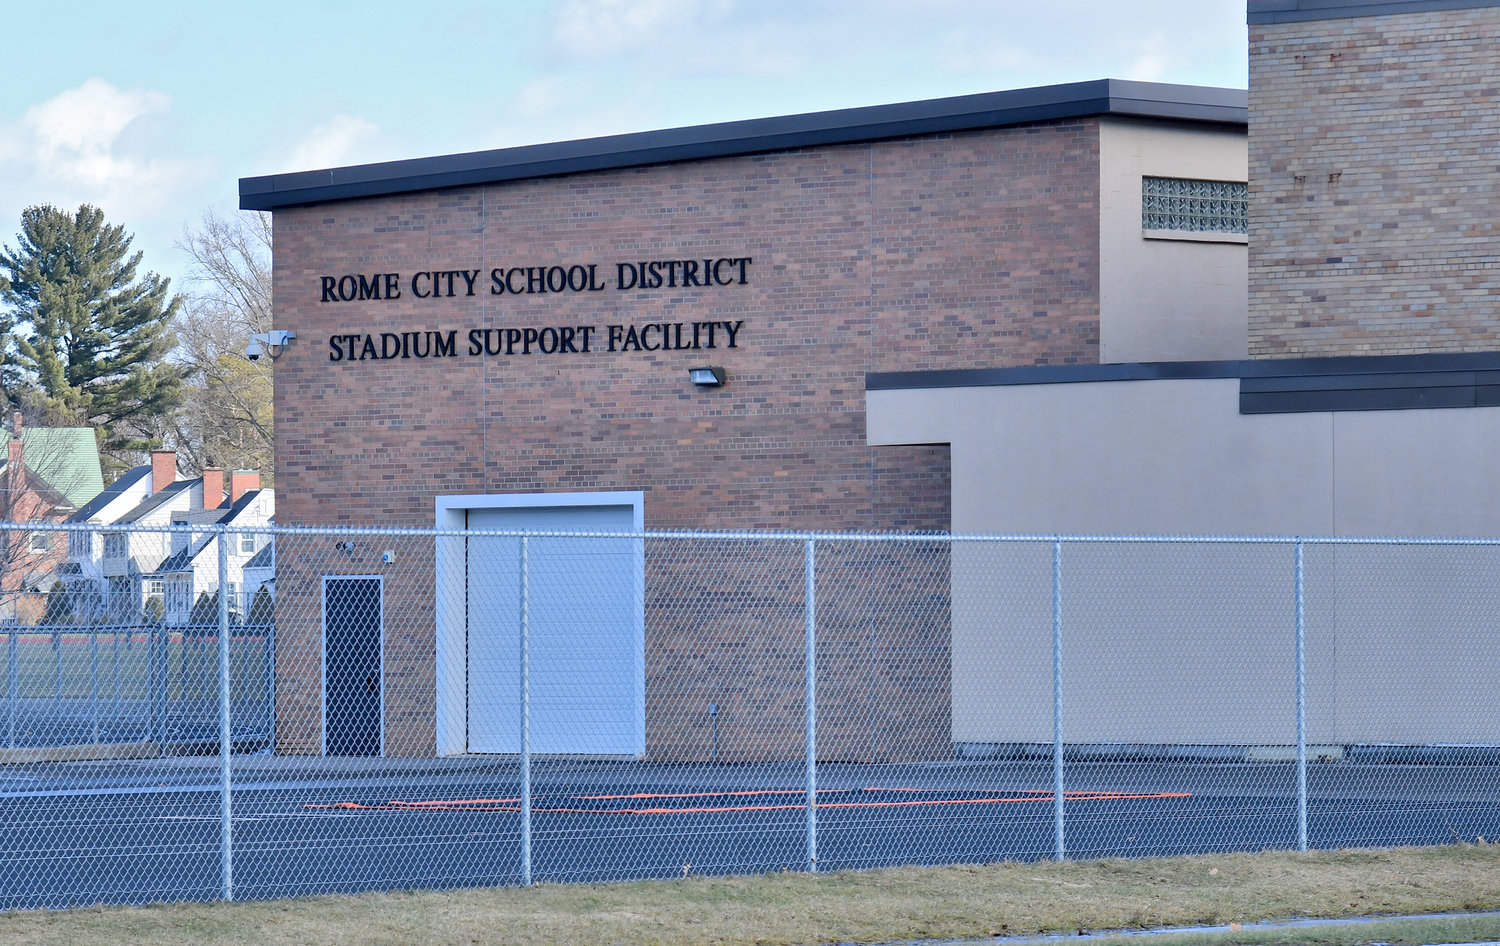 The Rome City School District stadium support facility is seen Tuesday, Feb. 14 in Rome from the Turin Street side.